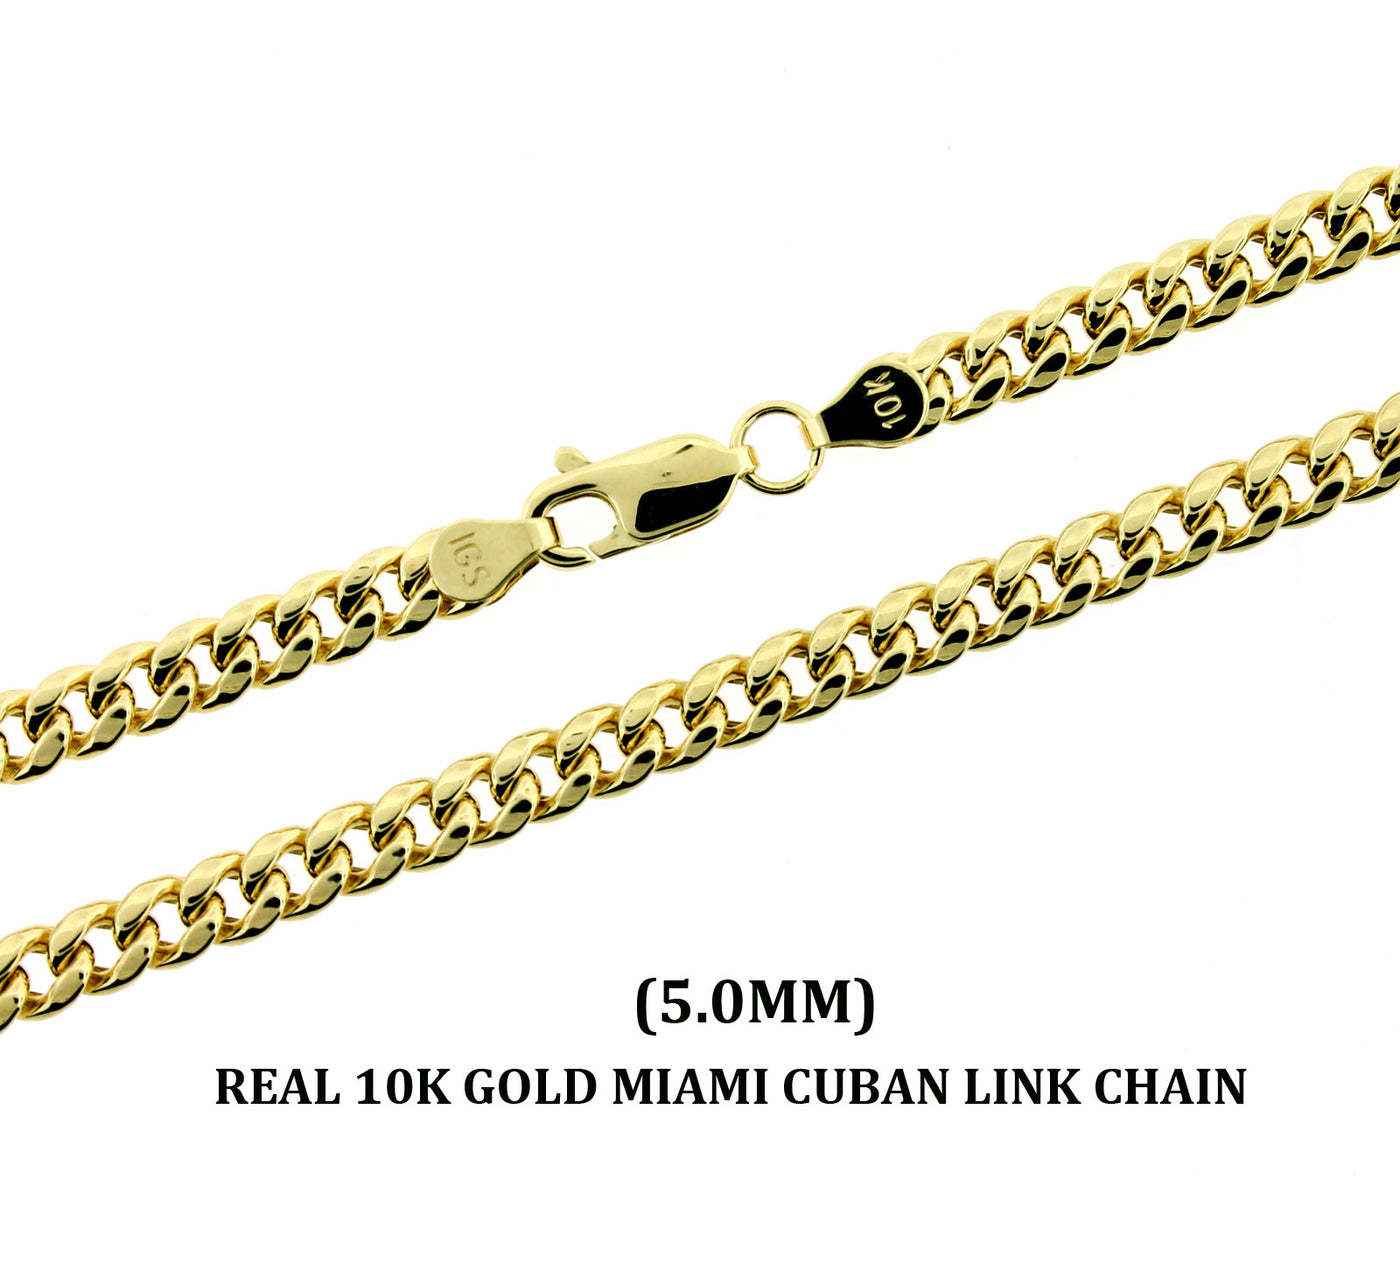 10K Solid Yellow Gold Men's 5mm Miami Cuban Link Chain Necklace, 10KT Real Gold